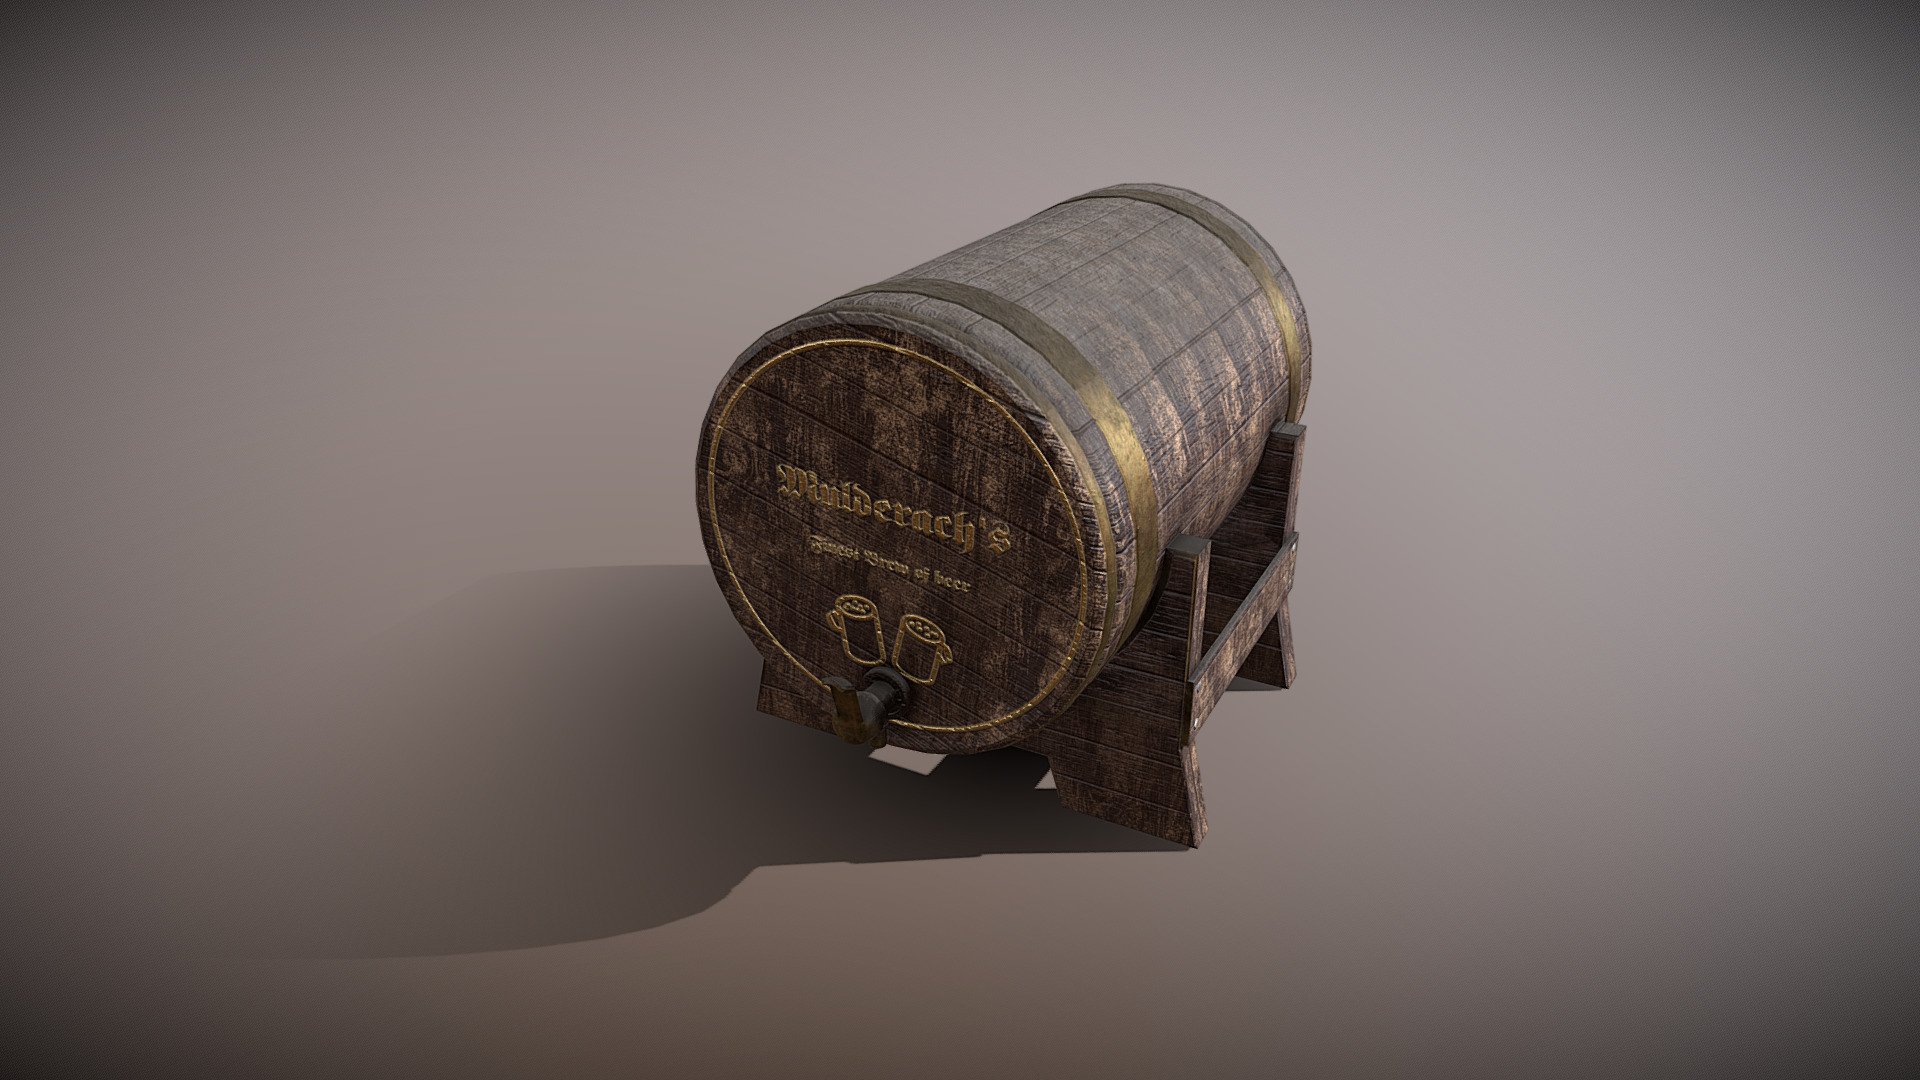 for the pub or tavern.
Time for a little more fun in the dojo&hellip; todays victim is:
https://sketchfab.com/garyelder
be sure to follow this cool guy!
Cheers!! - Beer barrel - Download Free 3D model by Thunder (@thunderpwn) 3d model